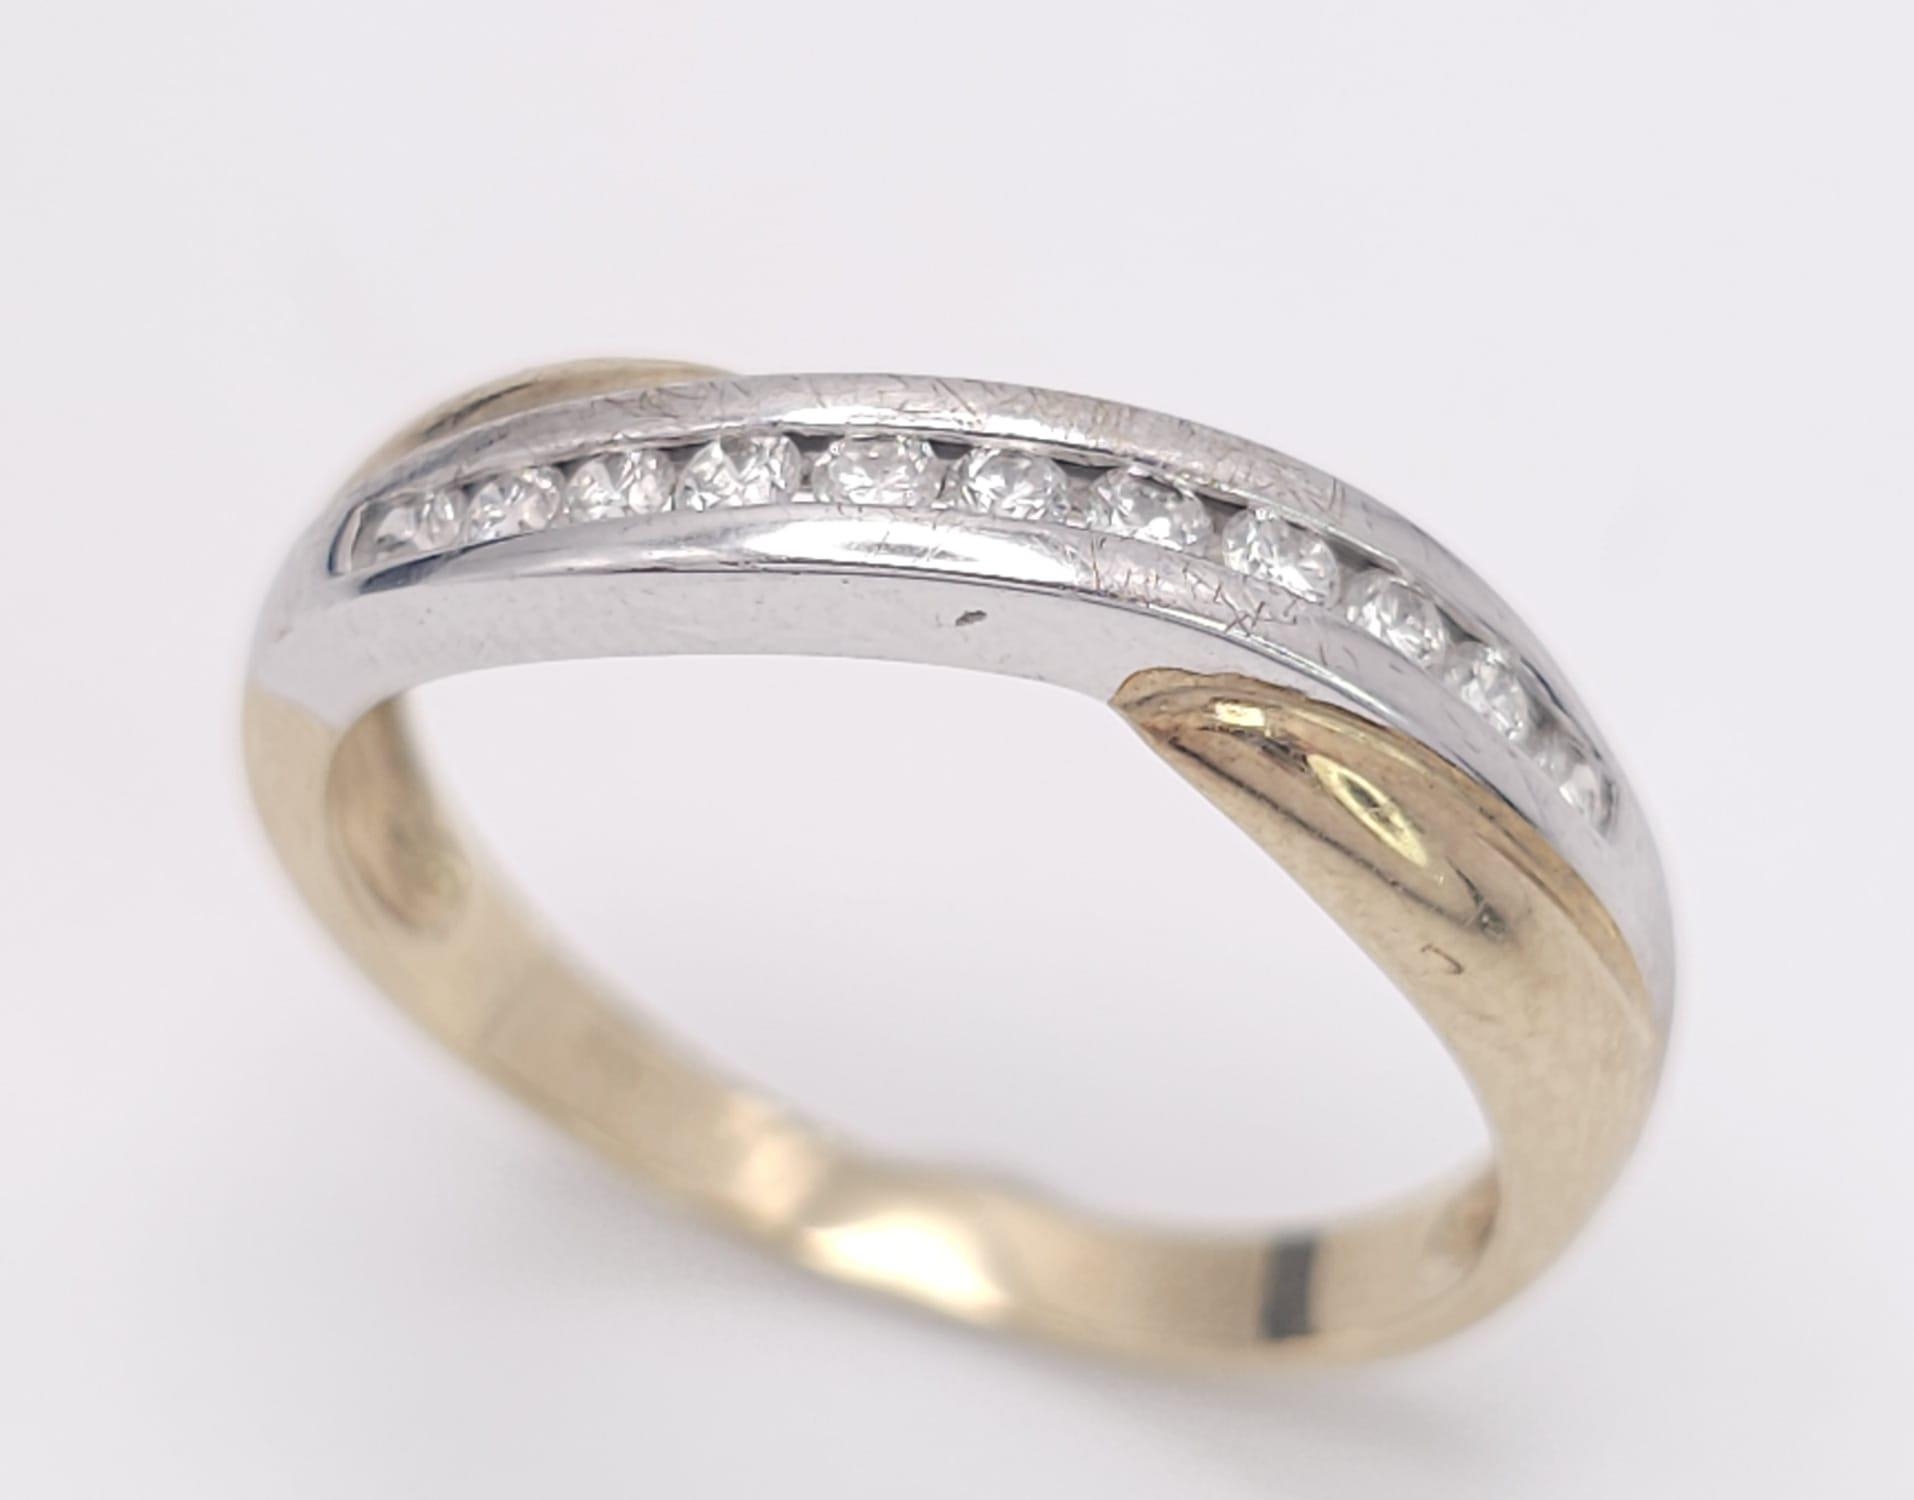 A 9K Yellow Gold and Diamond Half-Eternity Ring. 0.22ctw. 2.3g total weight. Size P.